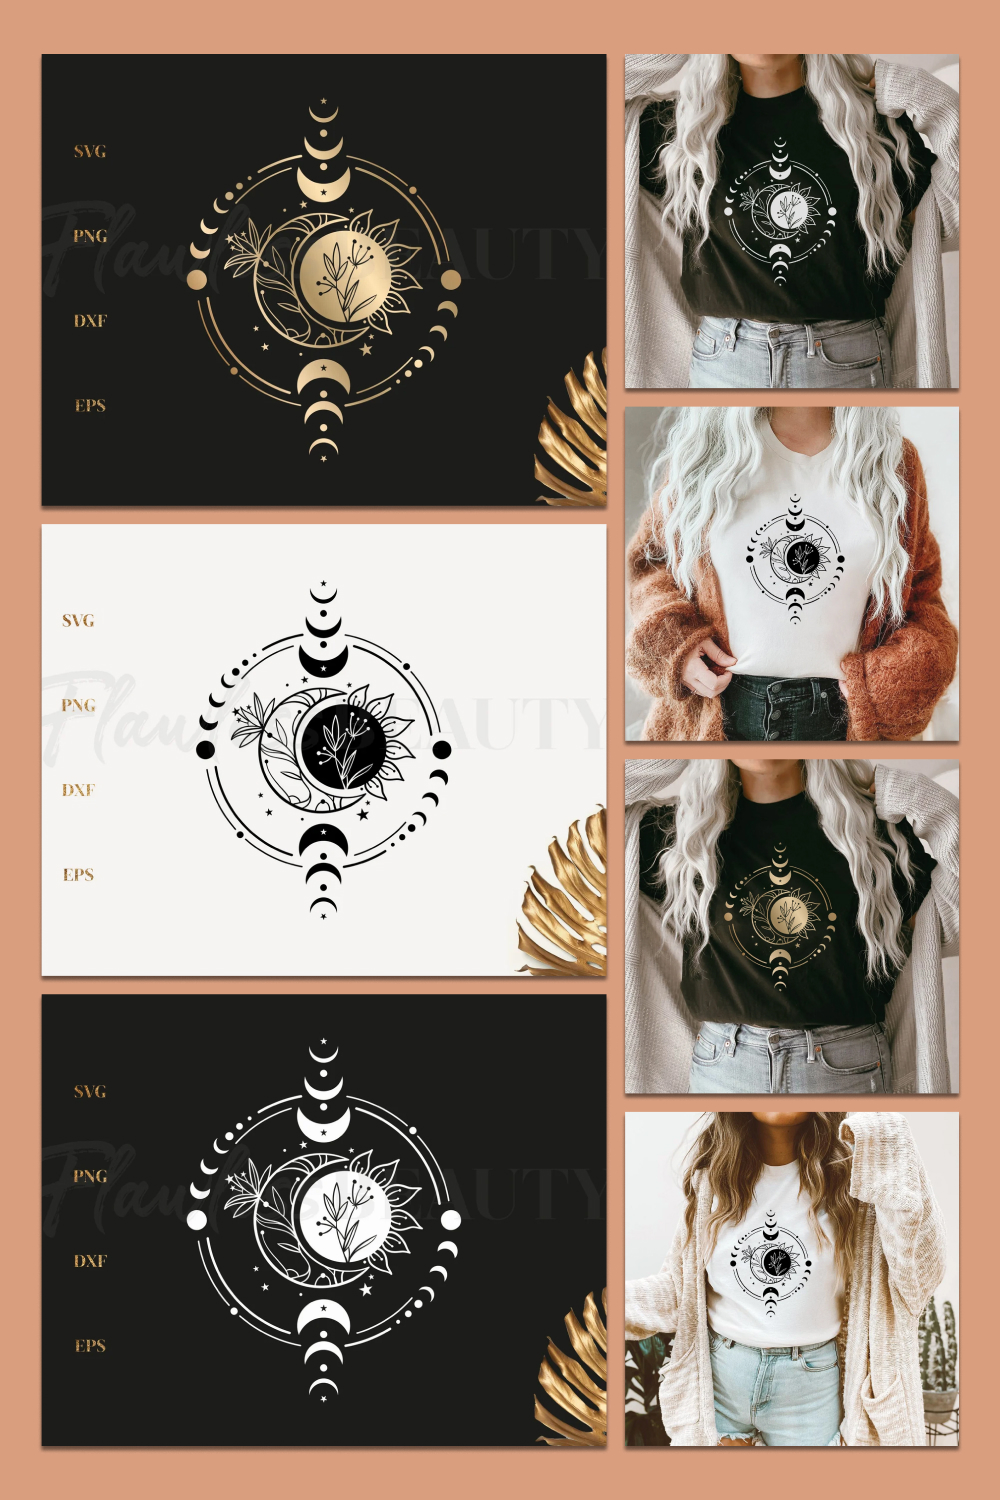 Prints with lunar symbols are indicated.